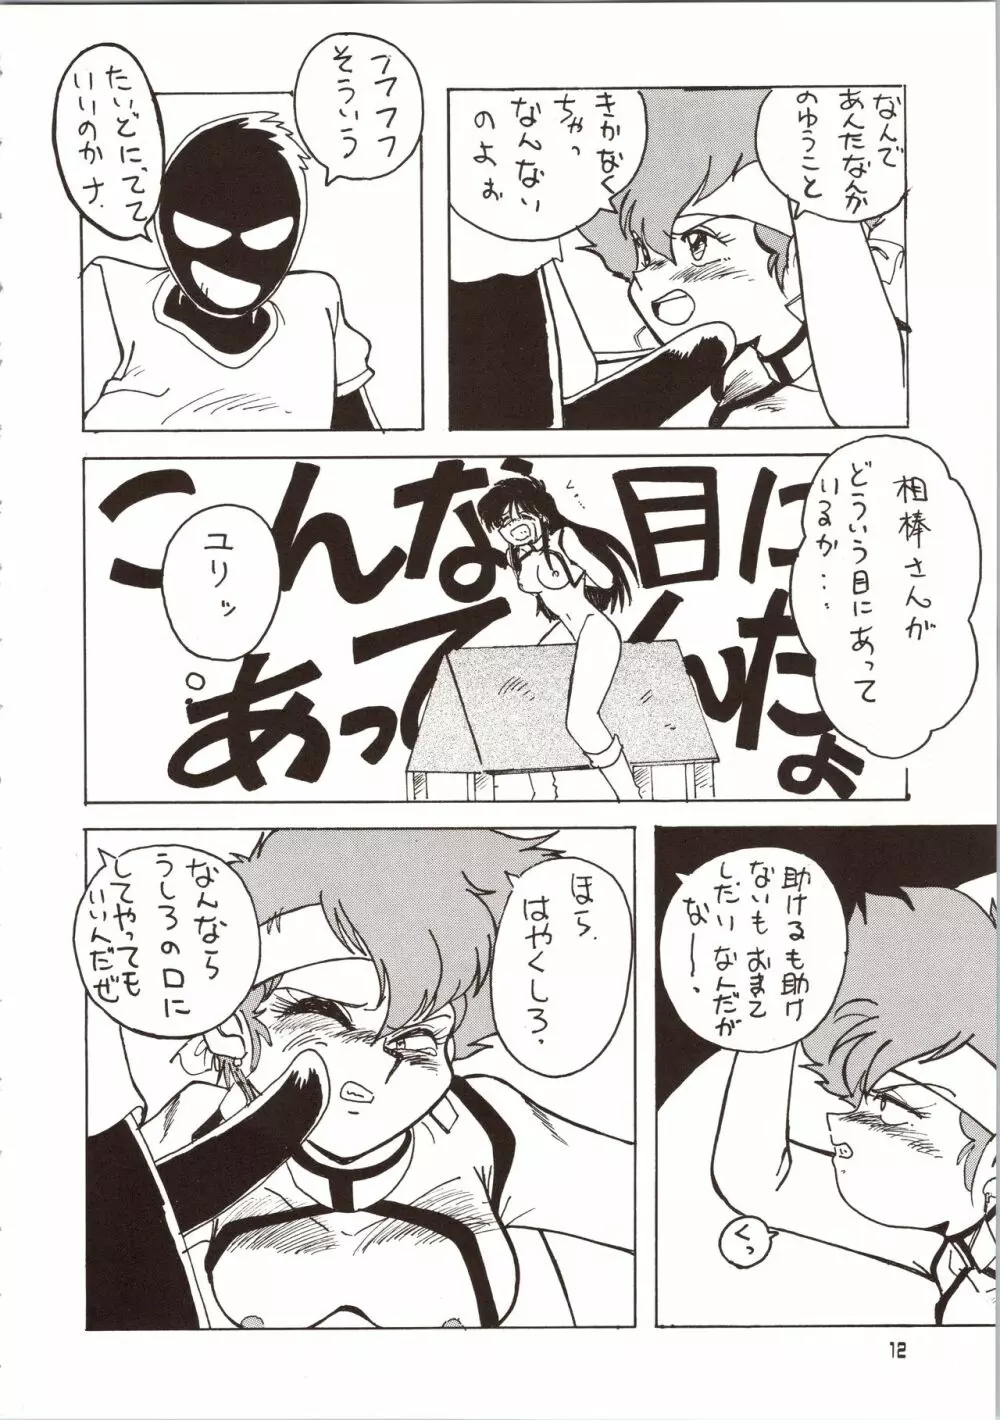 GO WEST Page.13